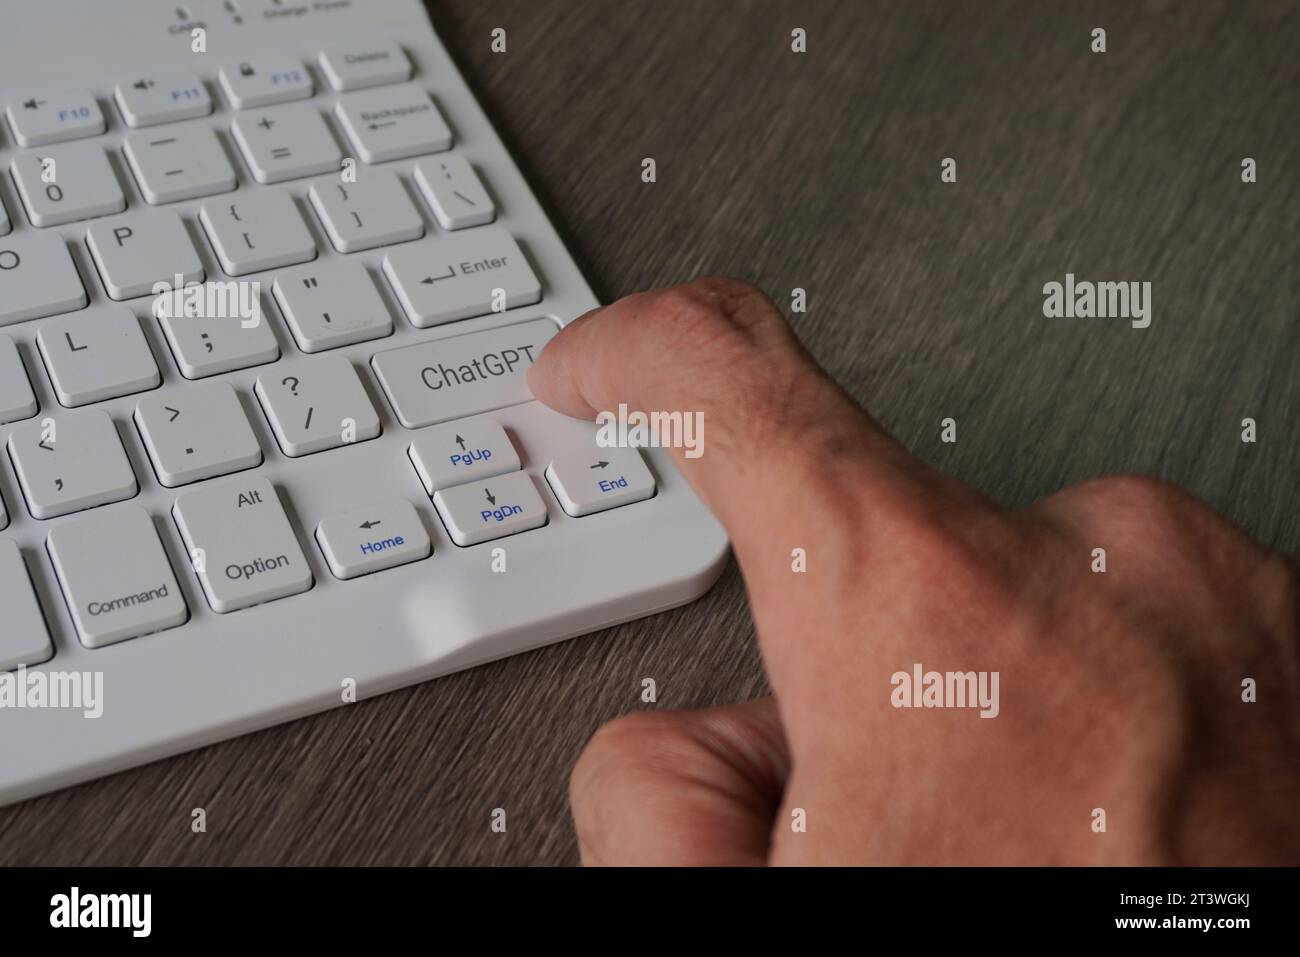 Closeup image of hand pressing keyboard label with ChatGPT. Stock Photo